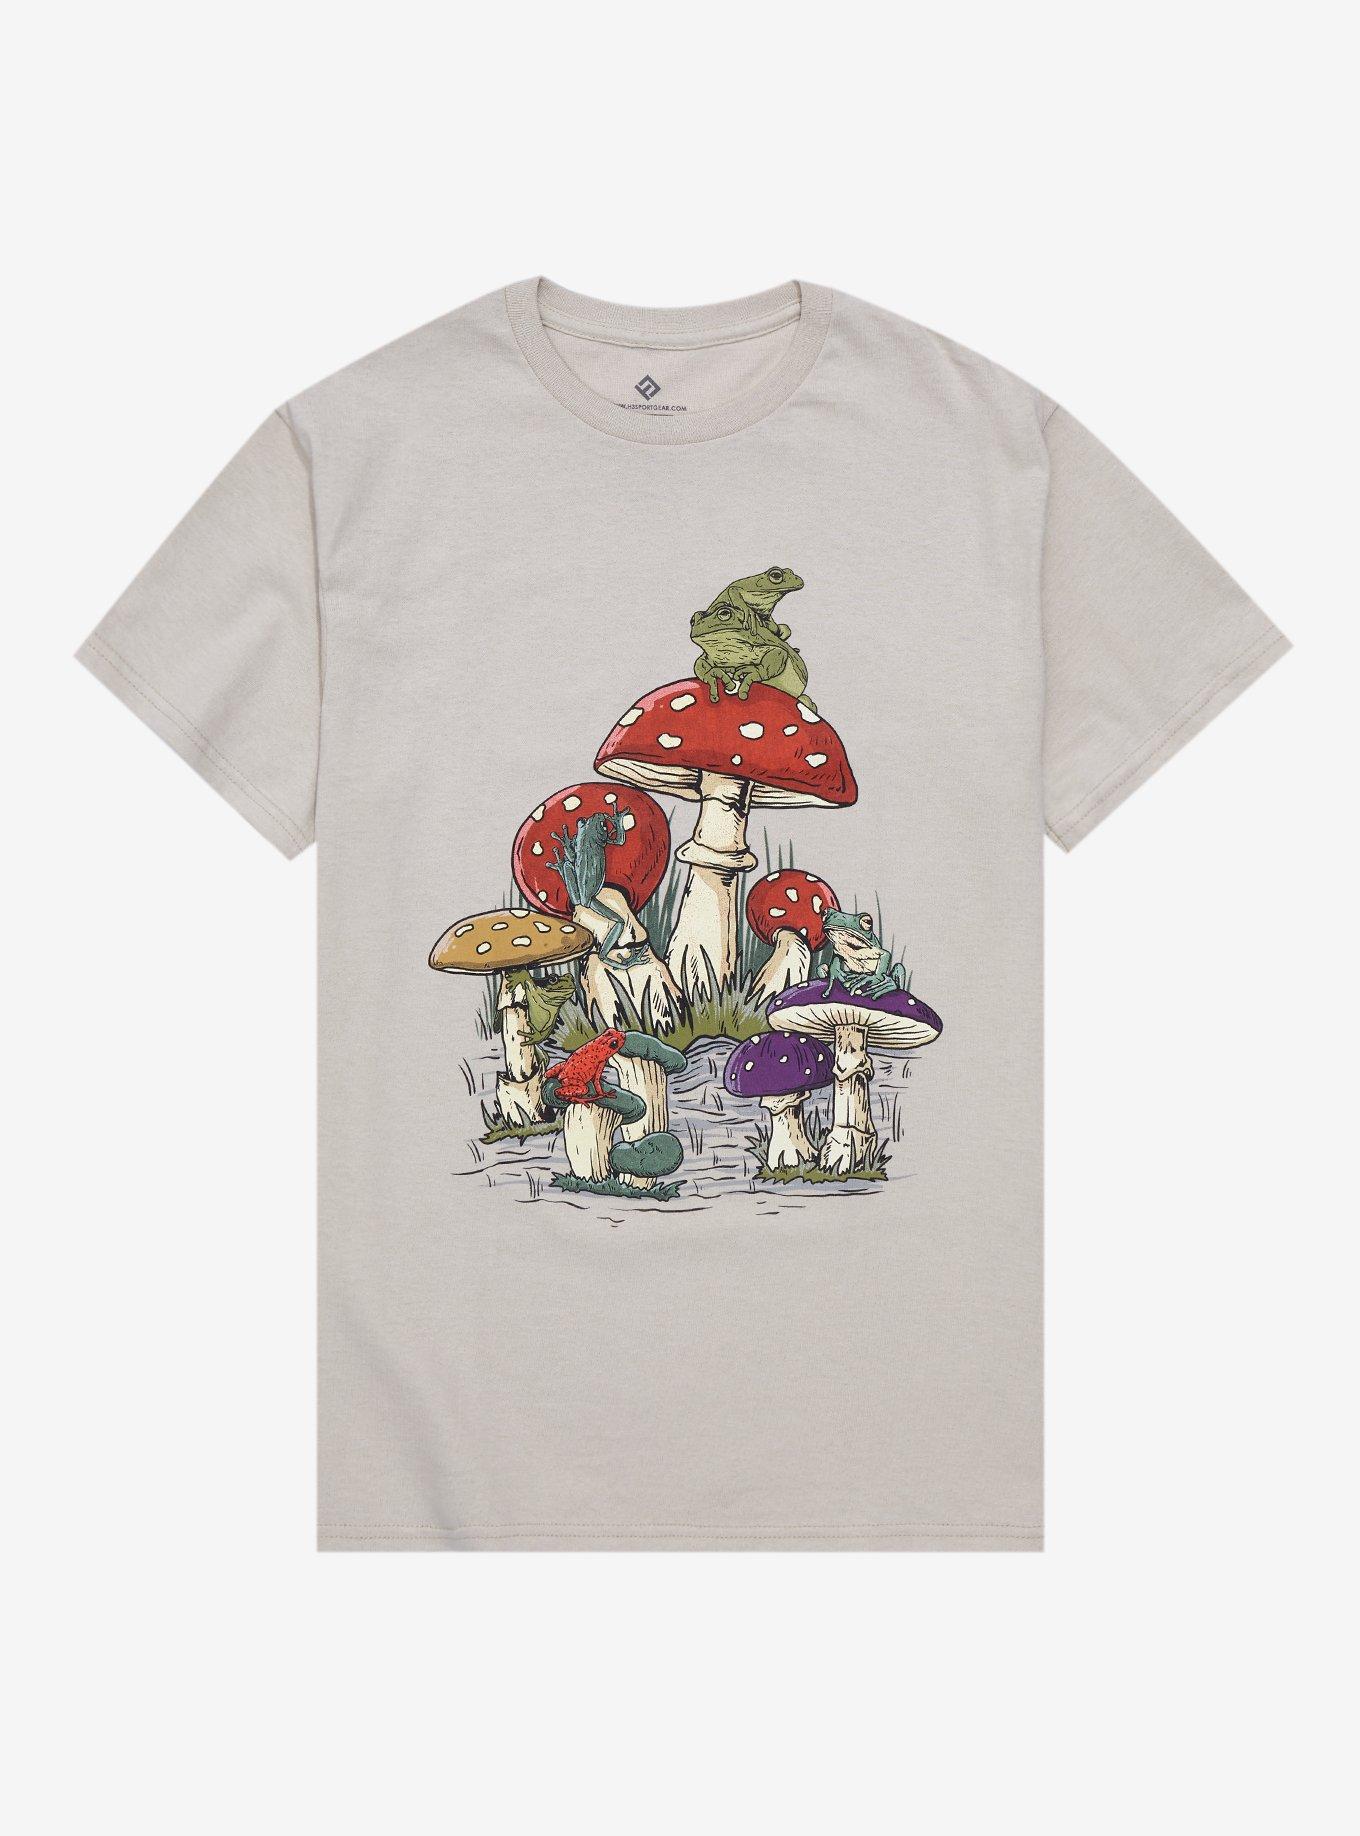 Frogs Sitting On Mushrooms T-Shirt | Hot Topic